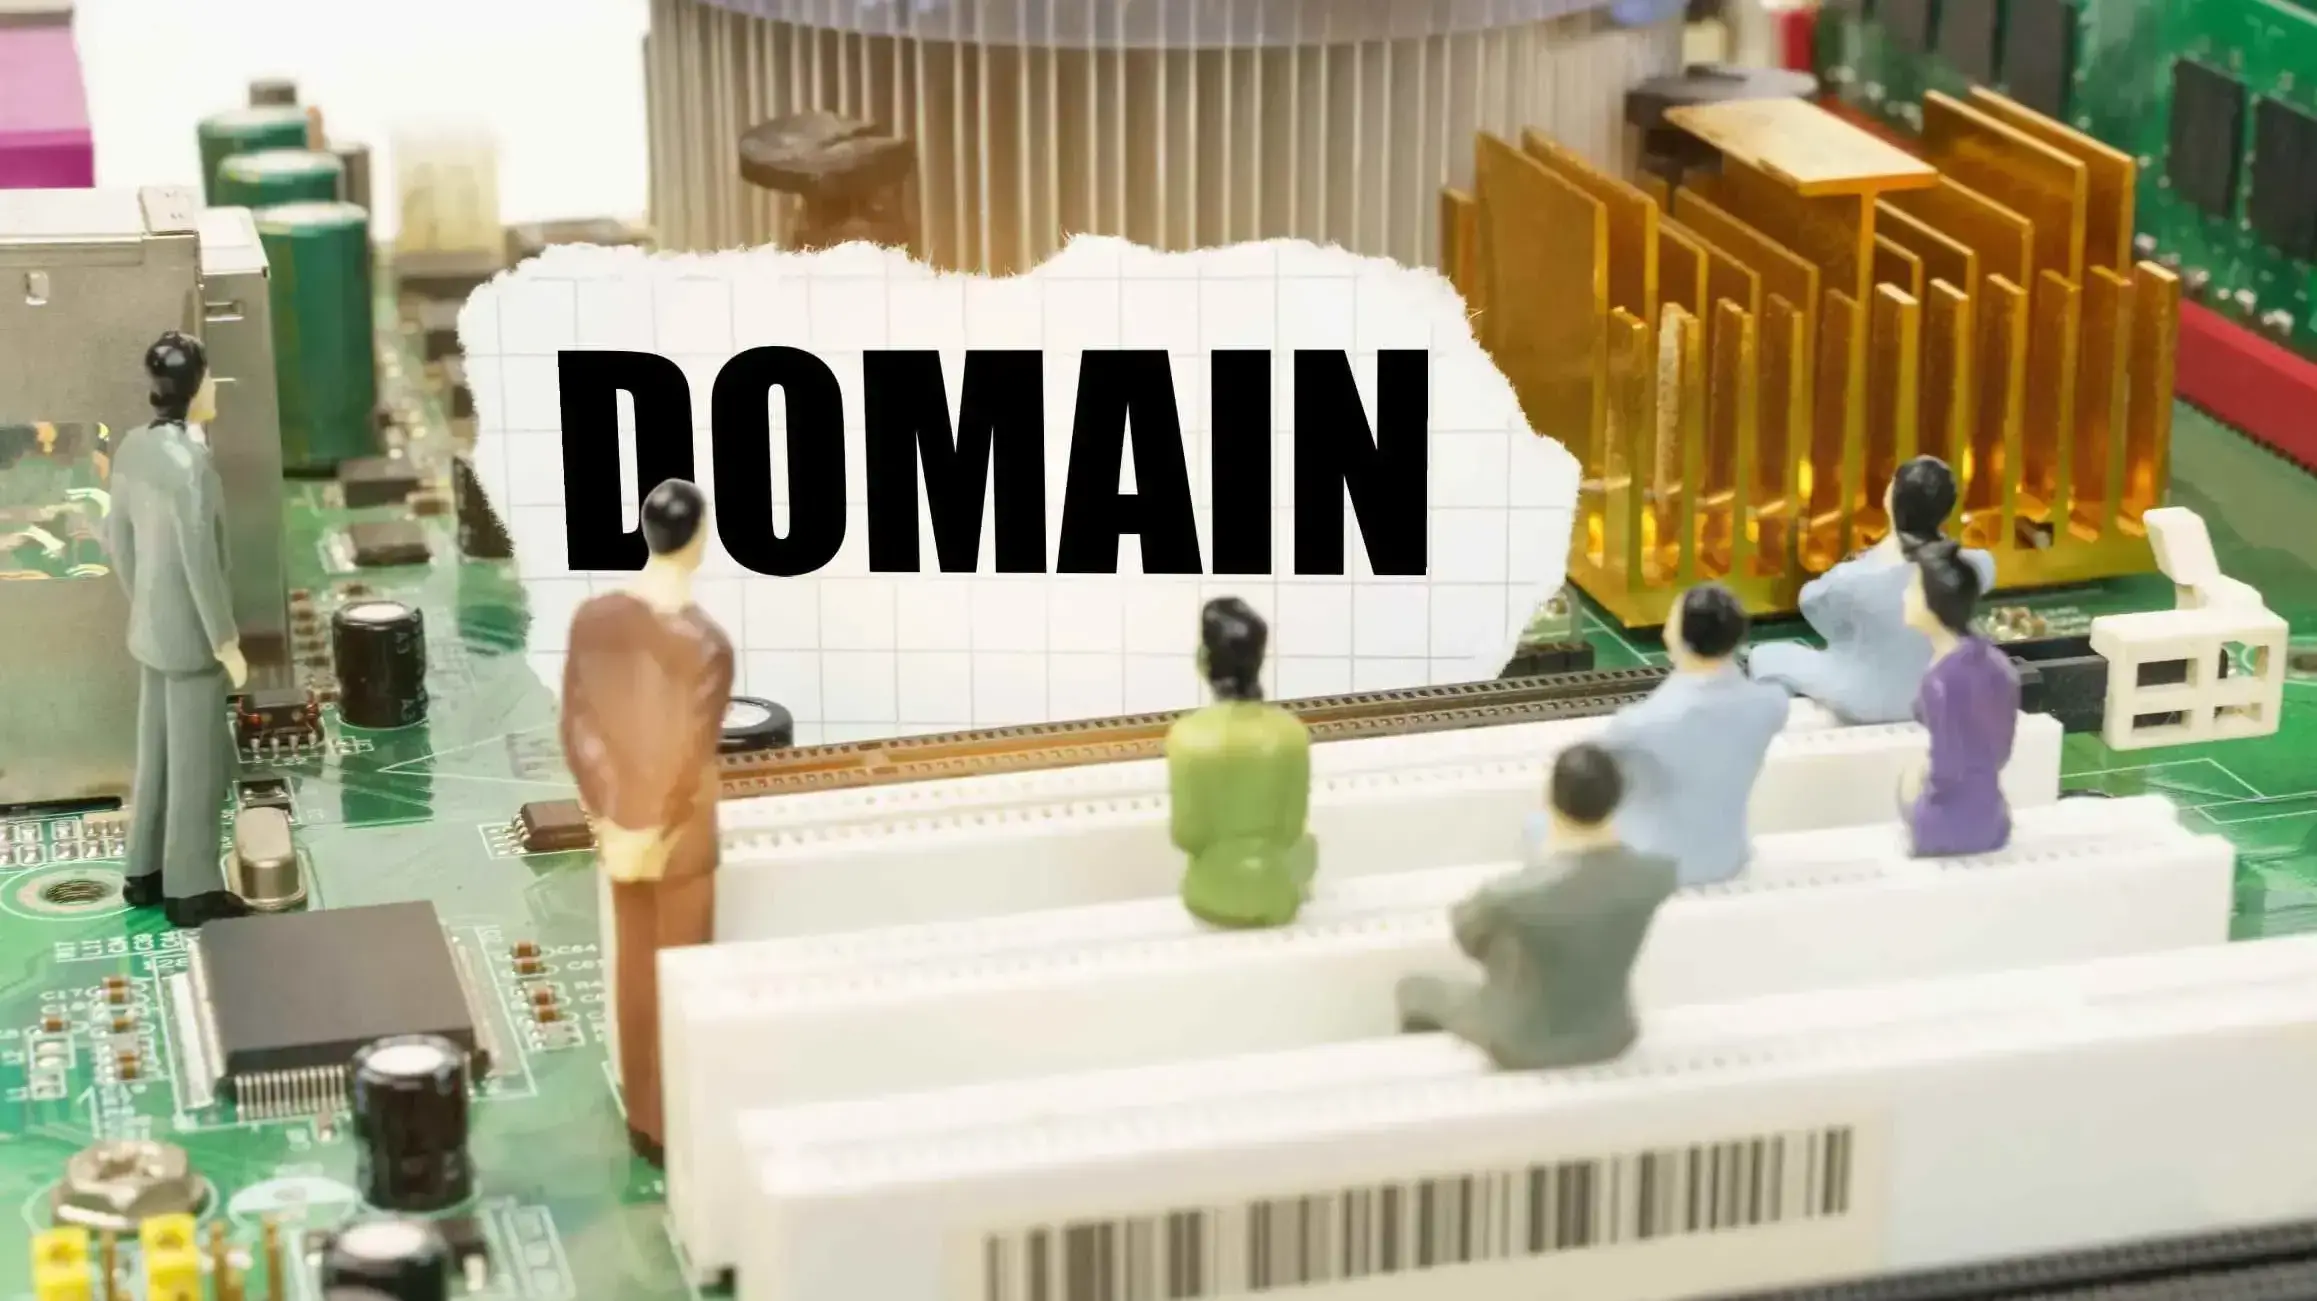 How to Find Out the Owner of a Domain